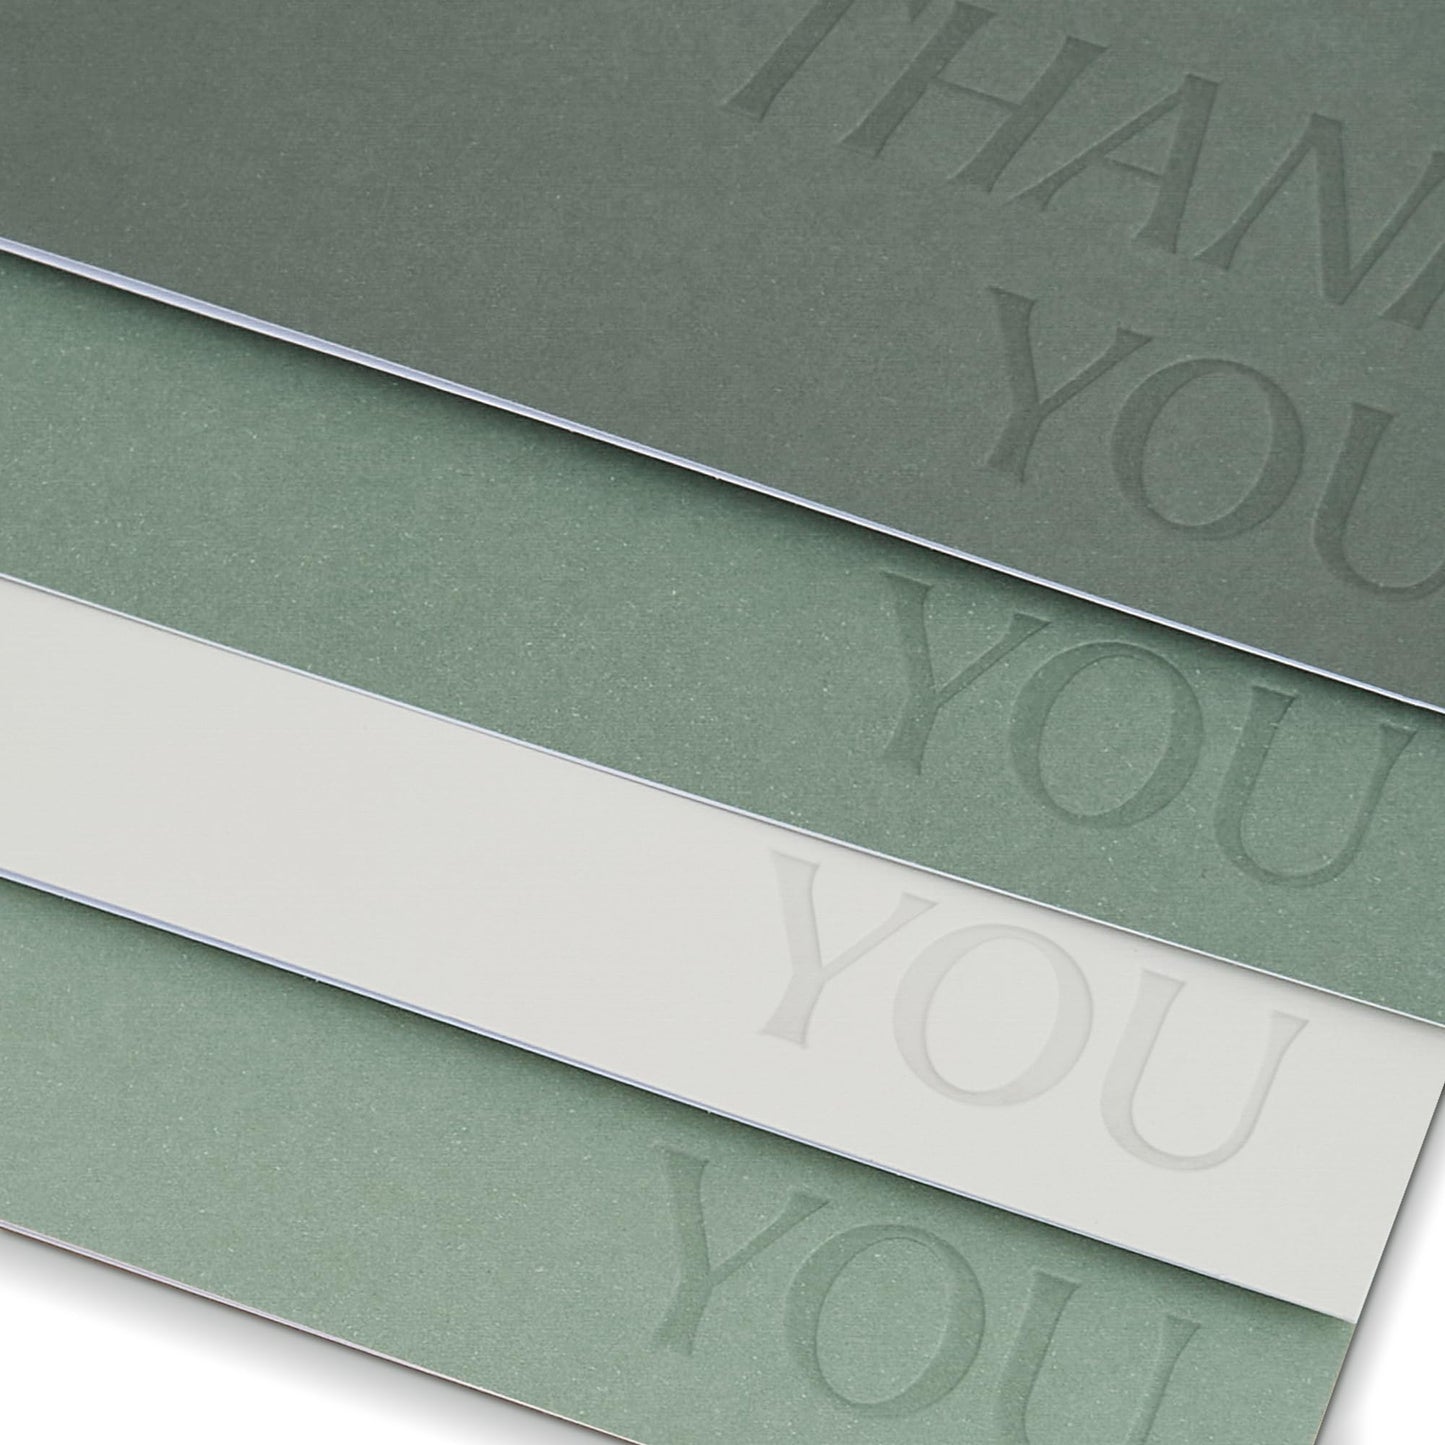 Beautiful Thank You Cards Set of 30 With Envelopes and Stickers - Elegant Blank Cards For Personalized Notes - Perfect Bulk Stationary Set For All Occasions incl. Weddings, Business & Baby Showers